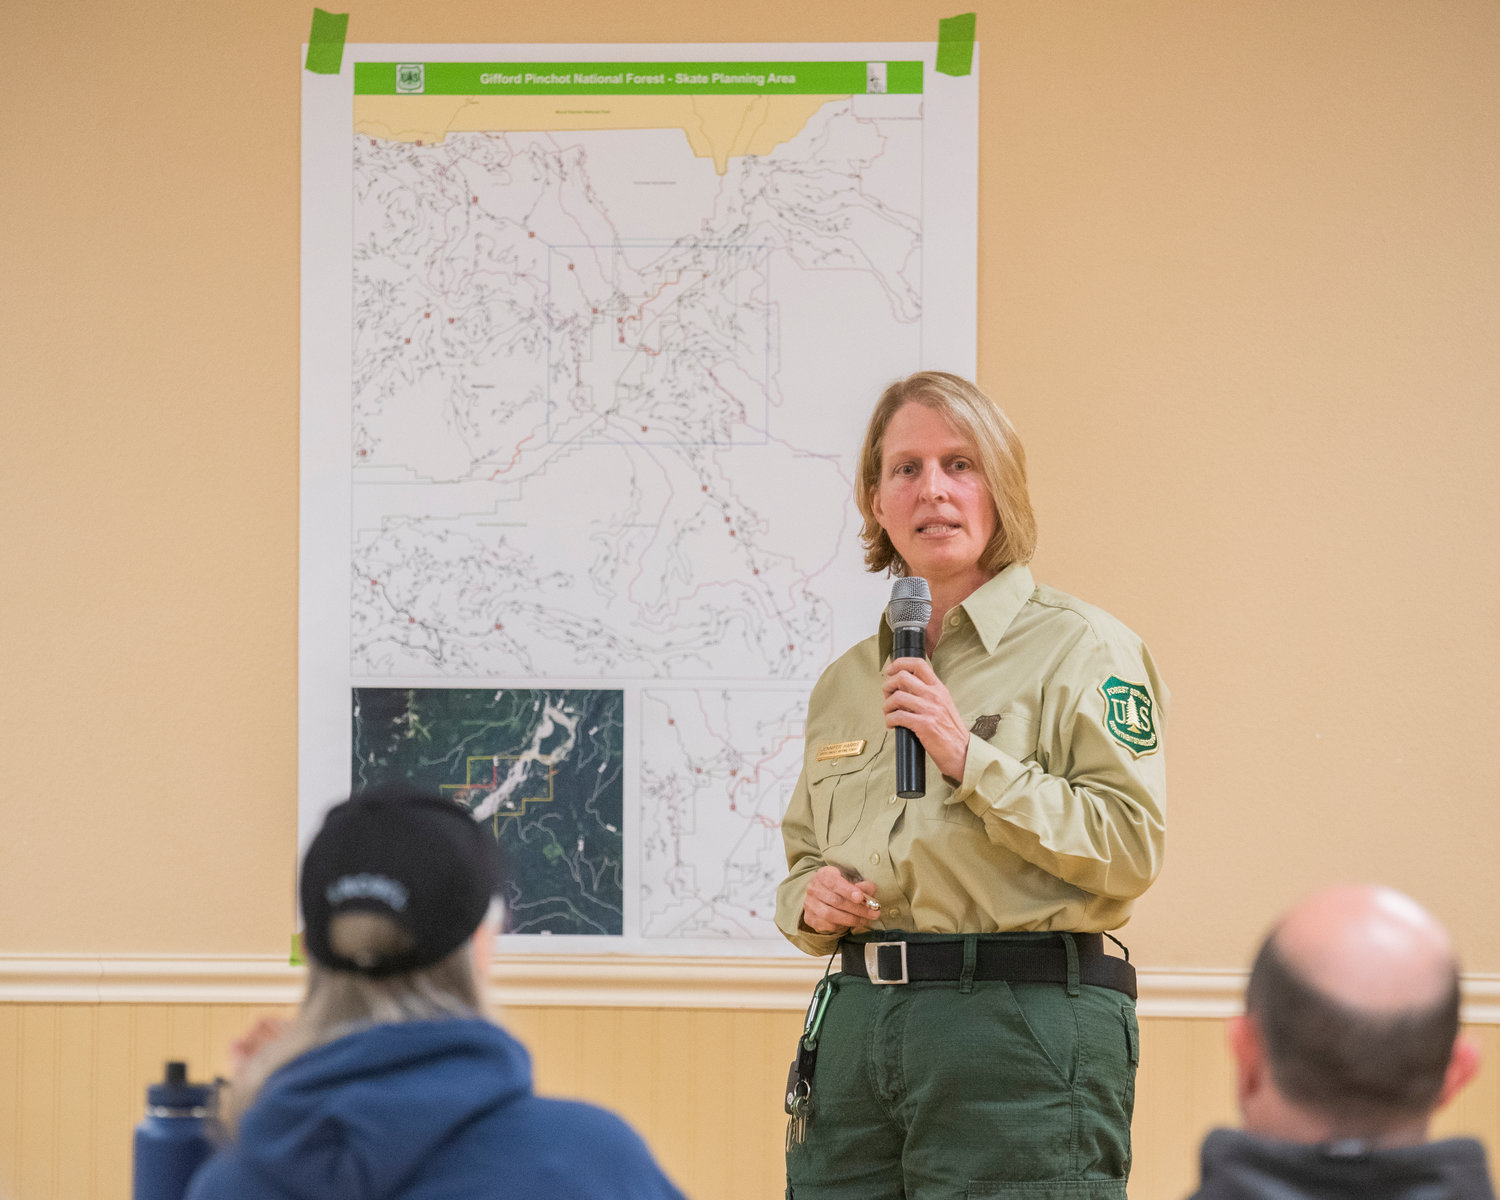 Zone Fire Management Officer Jennifer Harris, talks about the Cowlitz Valley Ranger District while pointing out areas on a map of the Gifford Pinchot National Forest State Planning Area Thursday night at the Packwood Community Center.